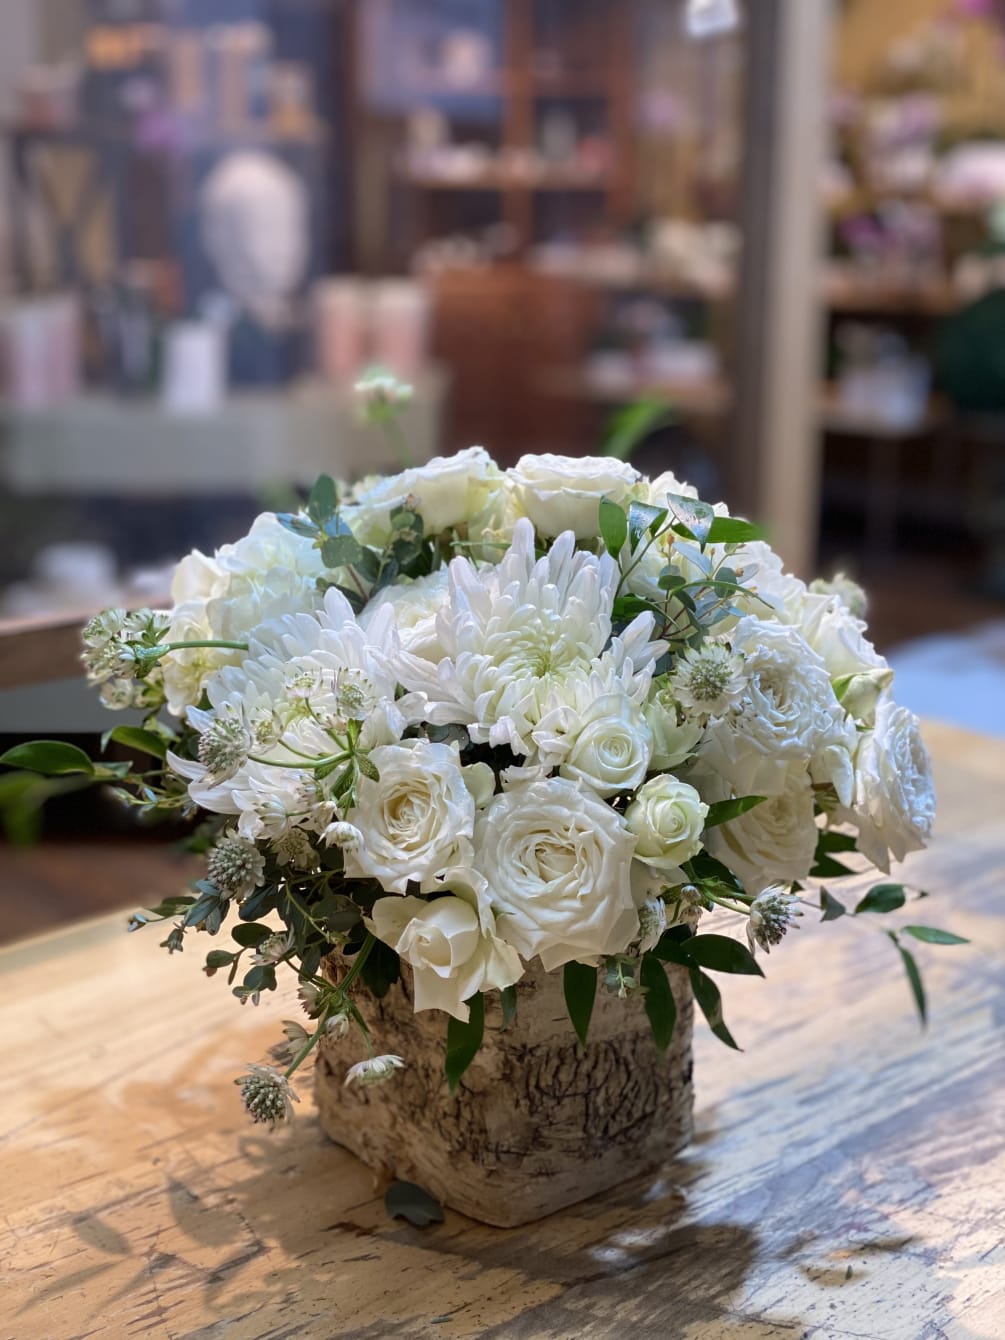 The graceful beauty of white rose and chrysanthemum combined with white astrantia